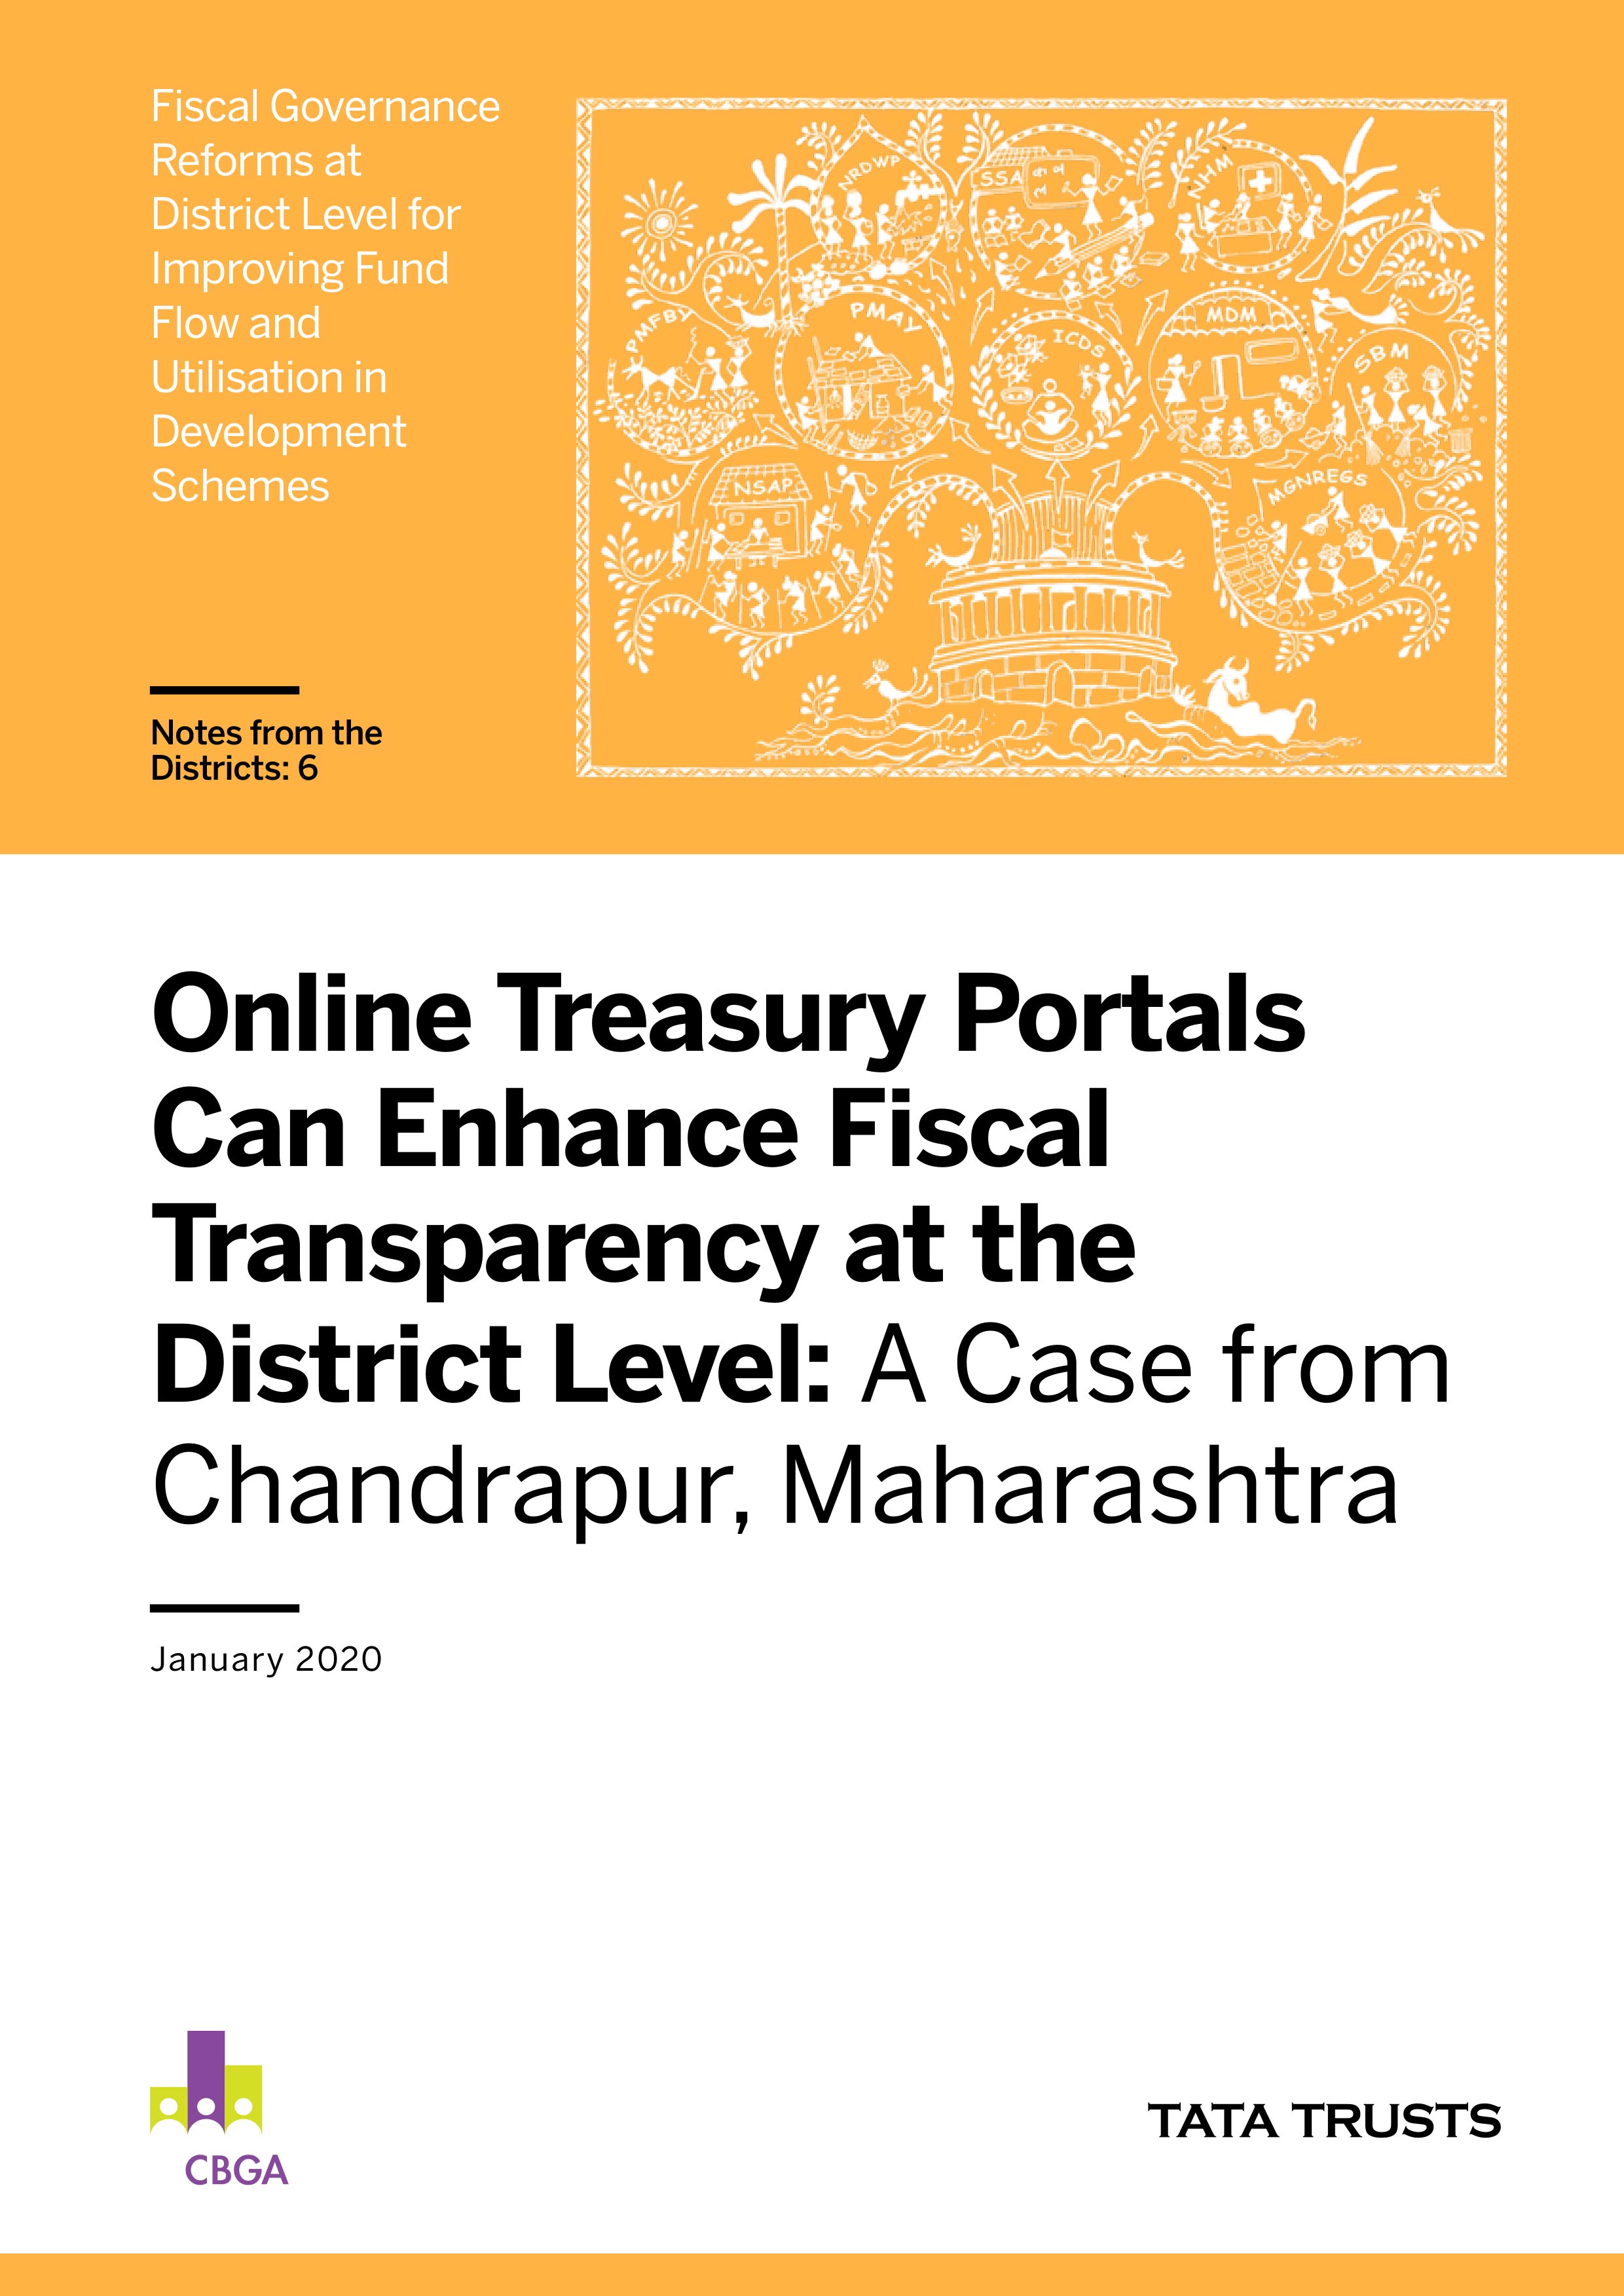 Treasury Portals for Fiscal Transparency-Case of Chandrapur